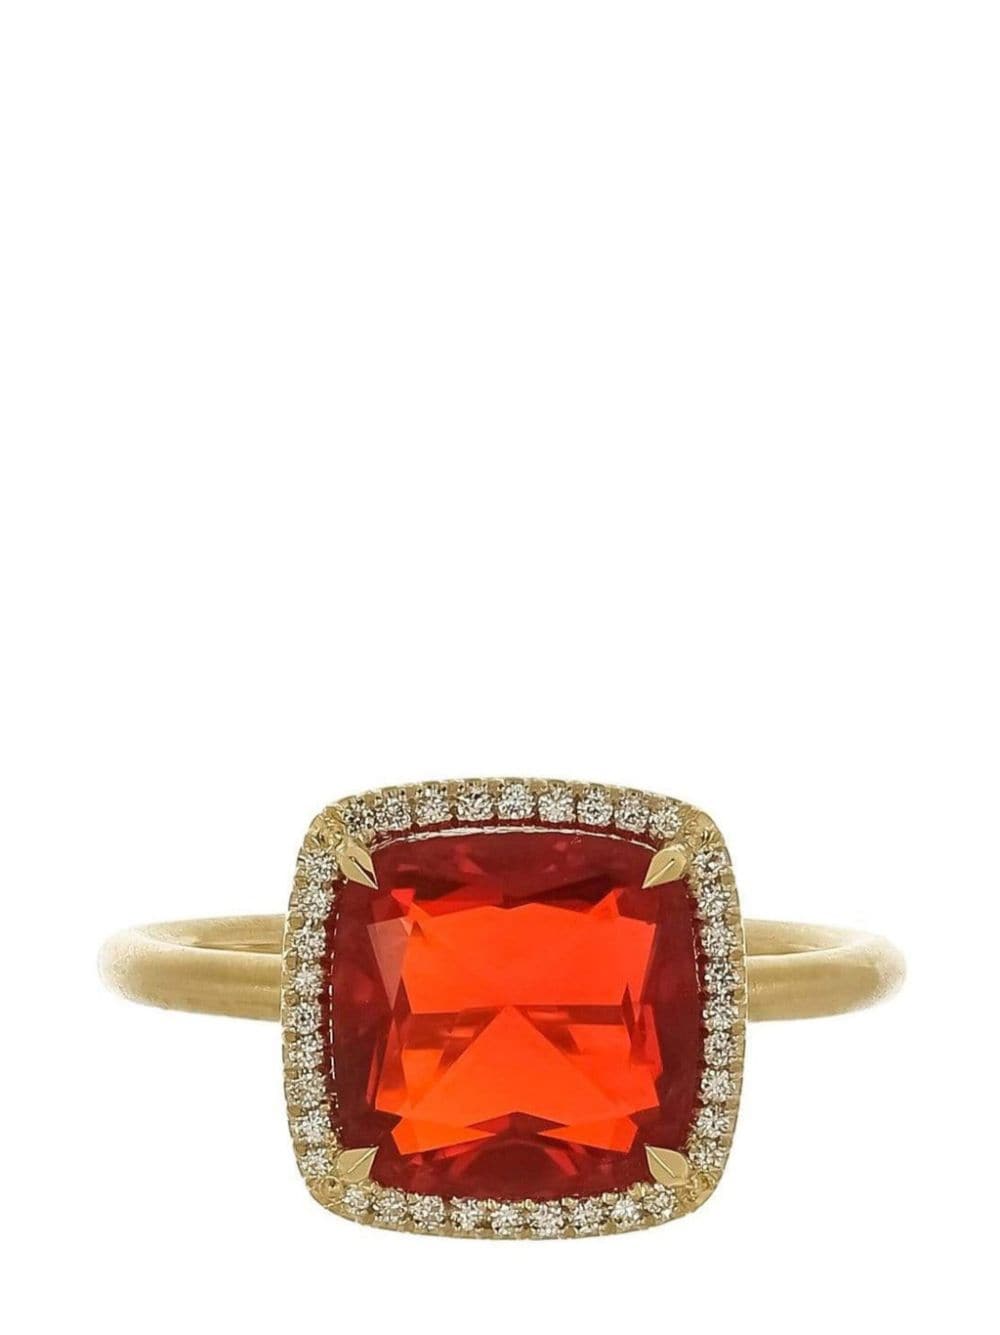 Irene Neuwirth 18kt yellow gold One Of A Kind fire opal and diamond ring von Irene Neuwirth